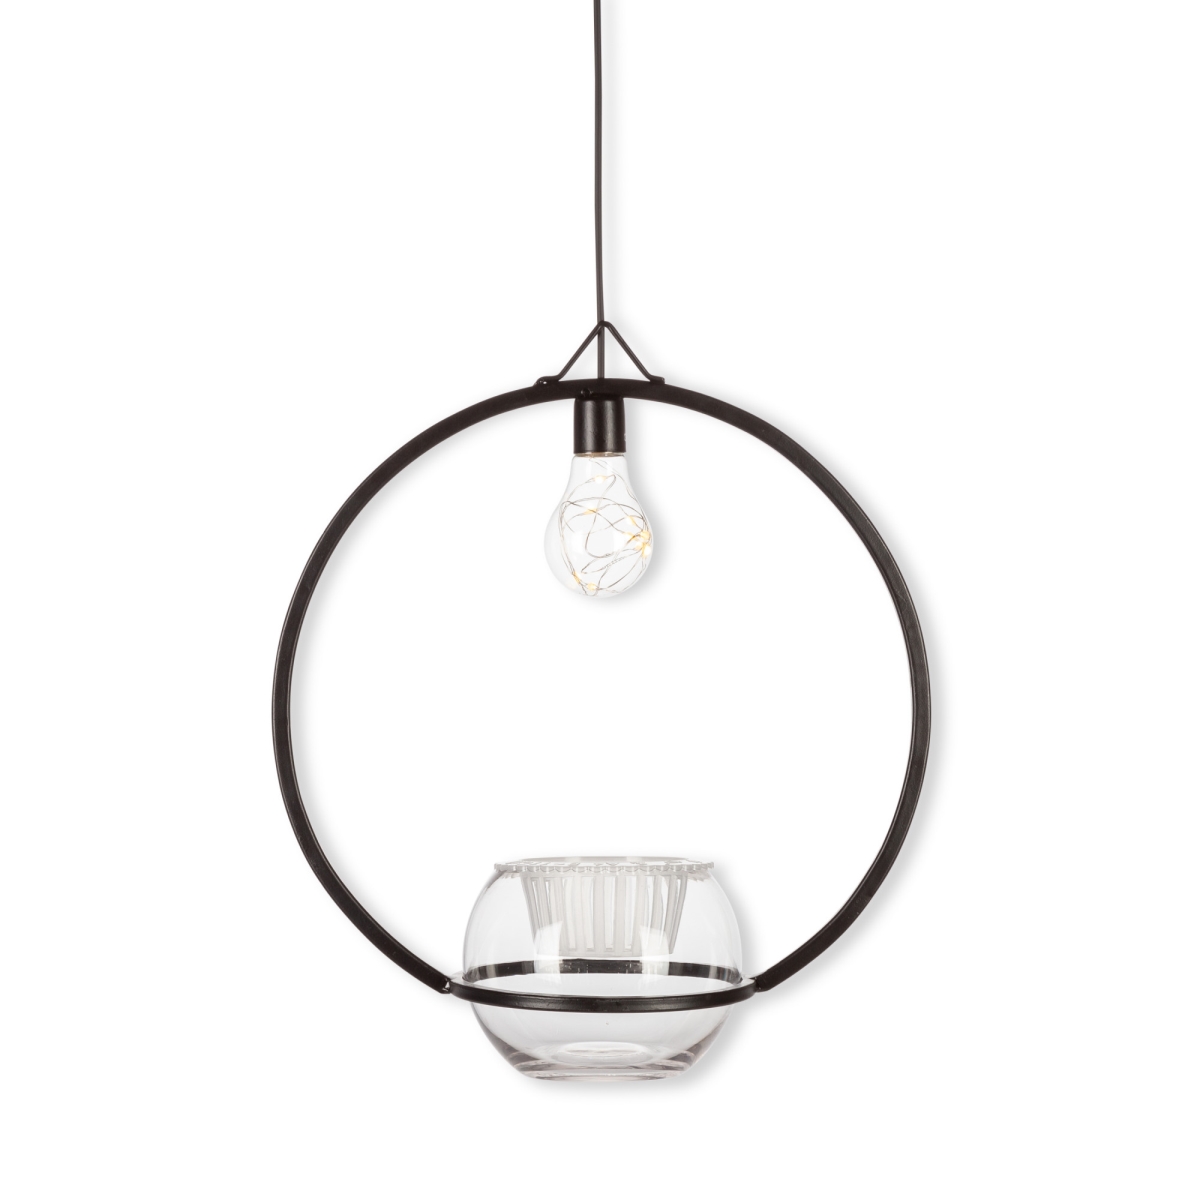 Gerson 44685ec Black Metal Round Lamp With Plastic Edison Bulb & Glass Accent, 9 Ft. Lead Wire & Ul Adapter